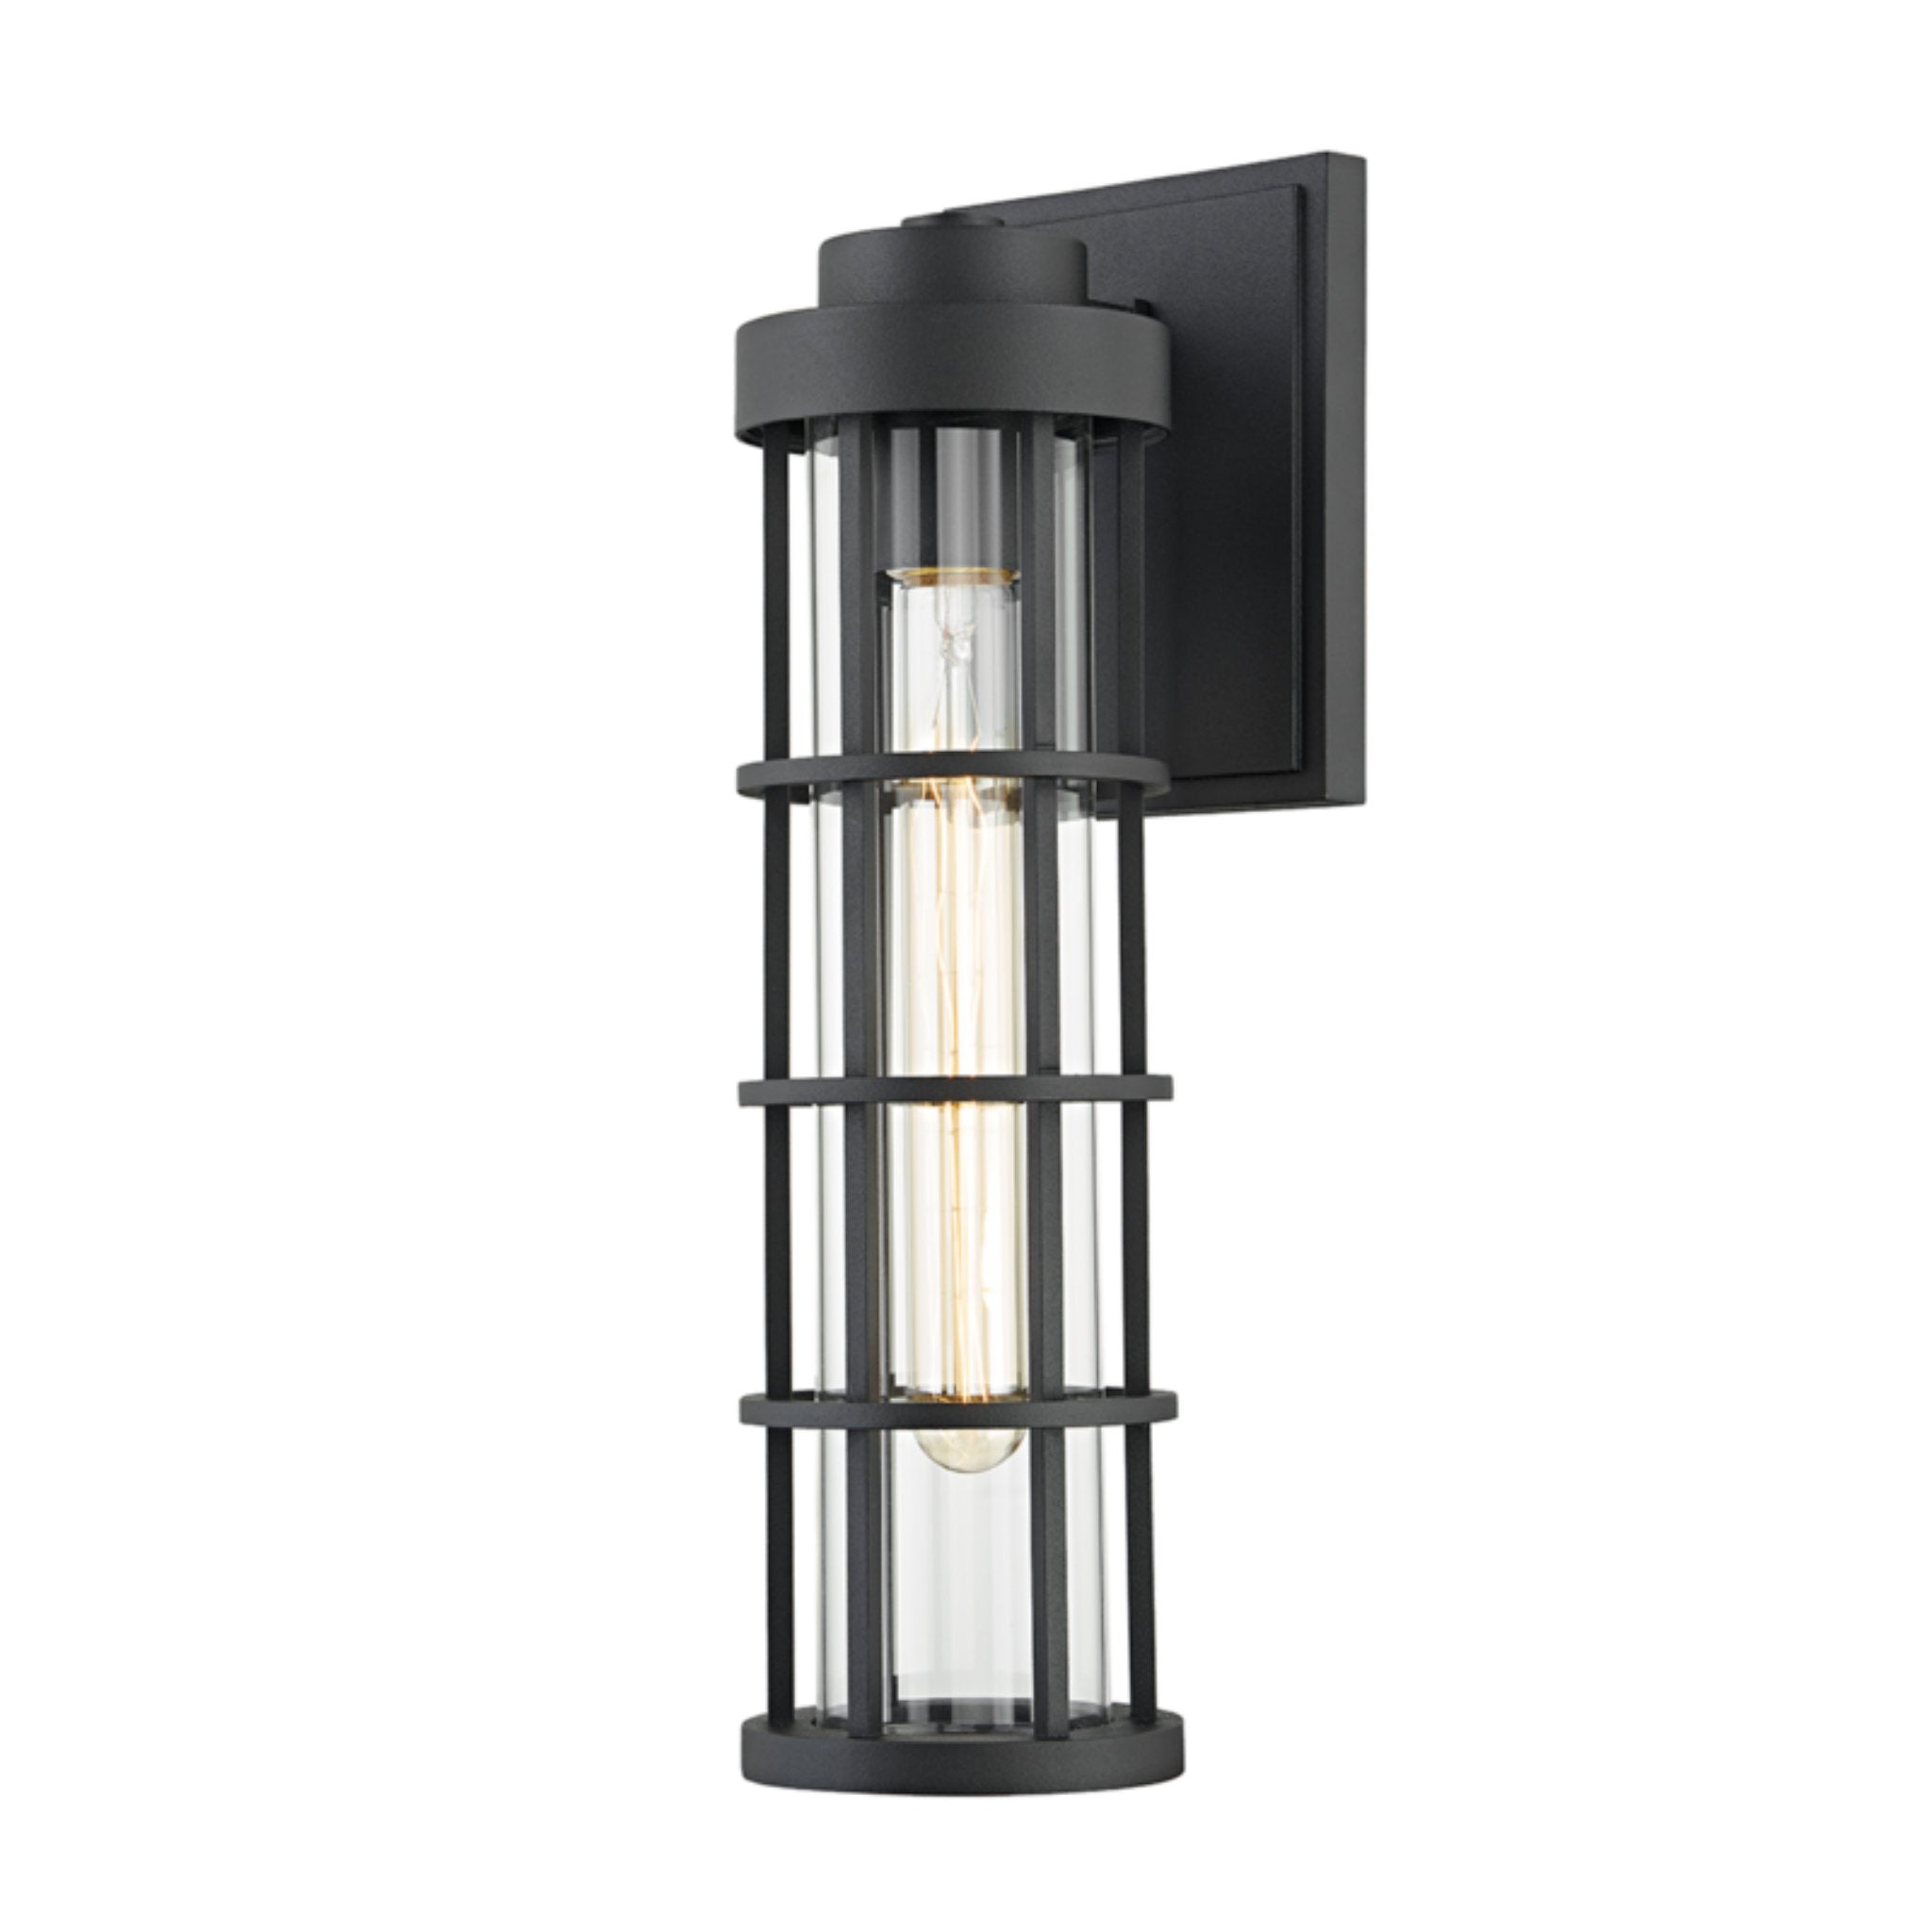 Mesa 1 Light Wall Sconce in Textured Black by Becki Owens